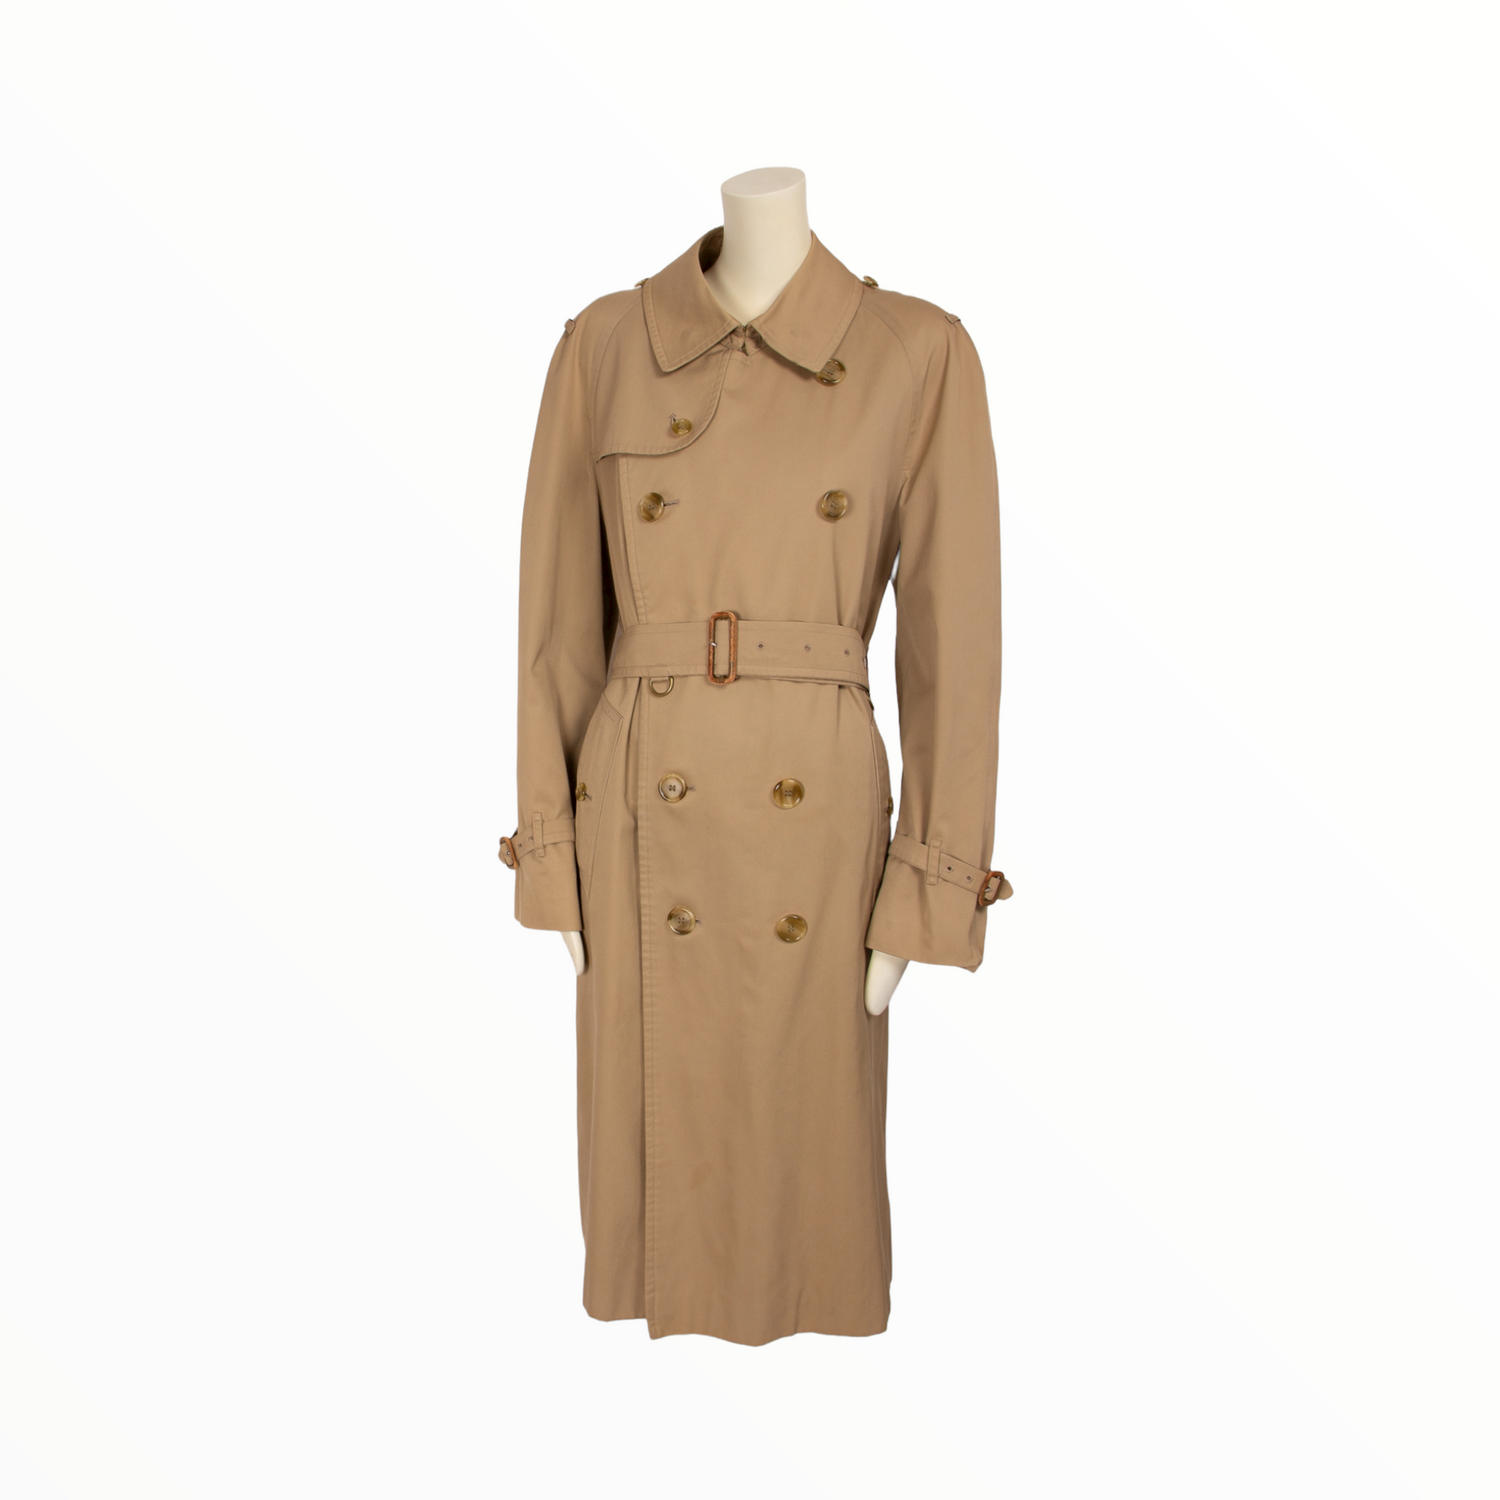 BURBERRY Trench coats vintage Lysis Paris pre-owned secondhand